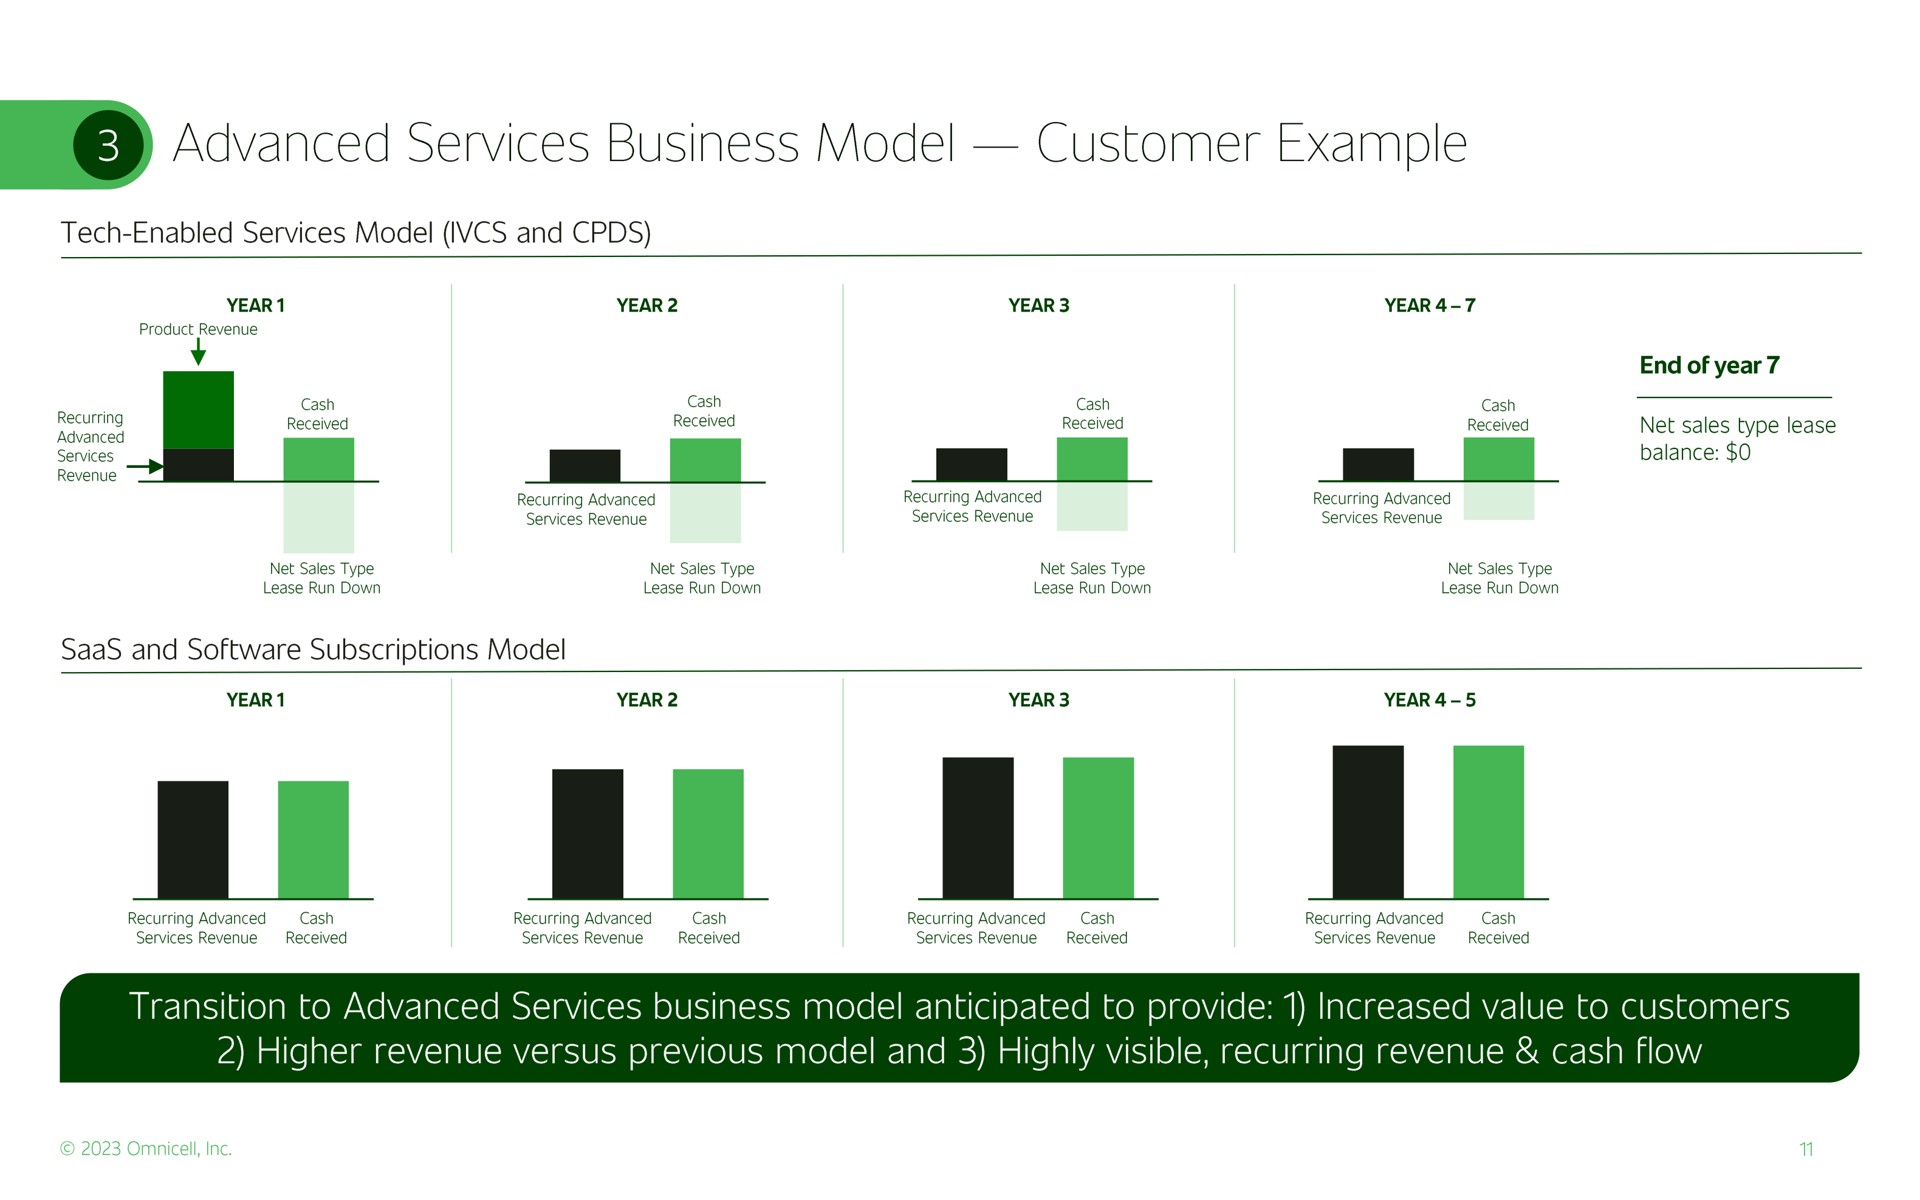 advanced services business model customer example transition to advanced services business model anticipated to provide increased value to customers higher revenue versus previous model and highly visible recurring revenue cash flow | Omnicell